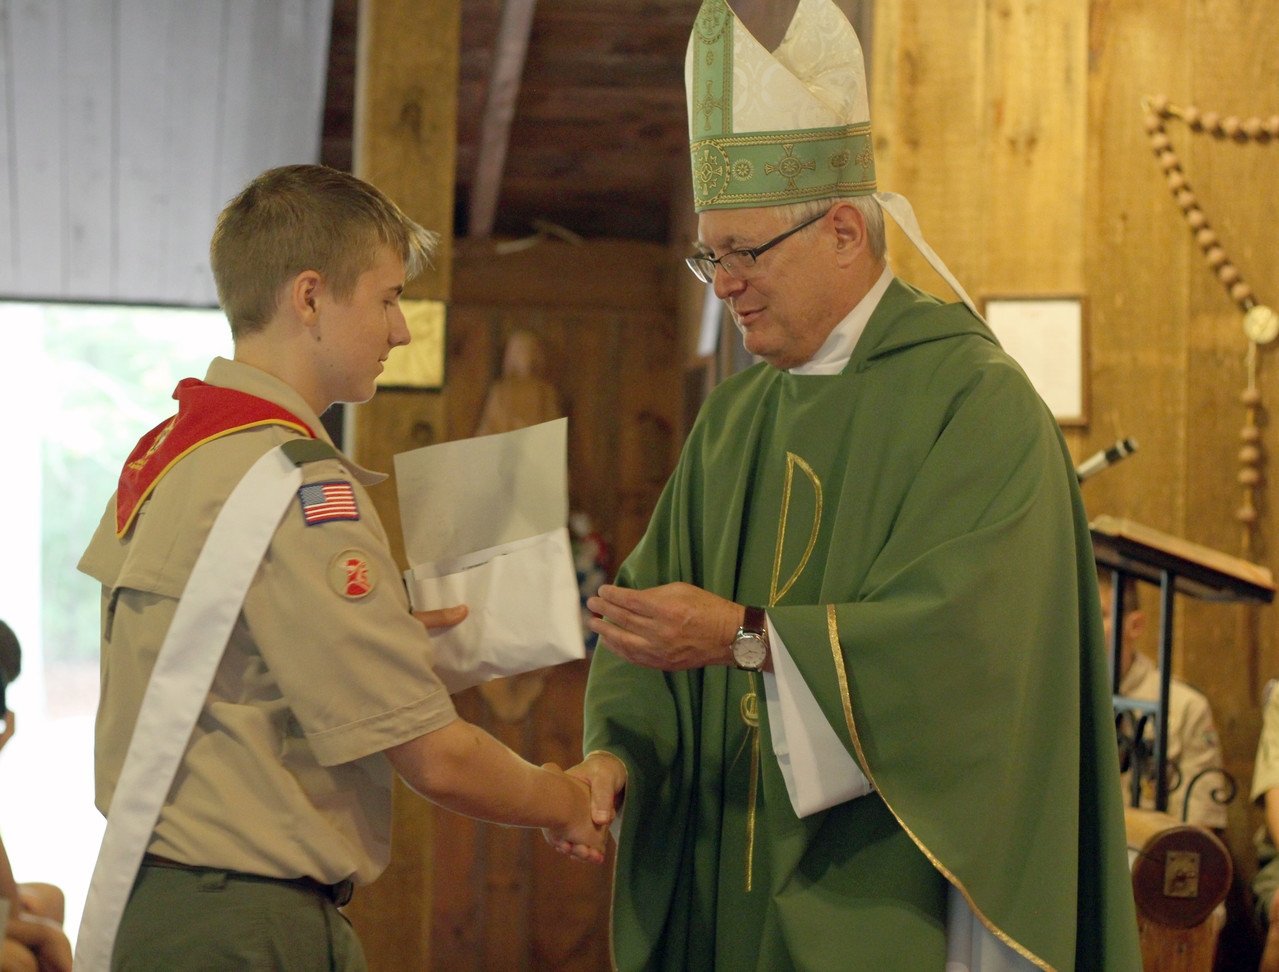 Following Mass, Bishop Tobin awarded Stephen Grivers, 16, of Providence Troop 76, with a Scout award for attending daily Mass each day at his weeklong stay at Yawgoog.